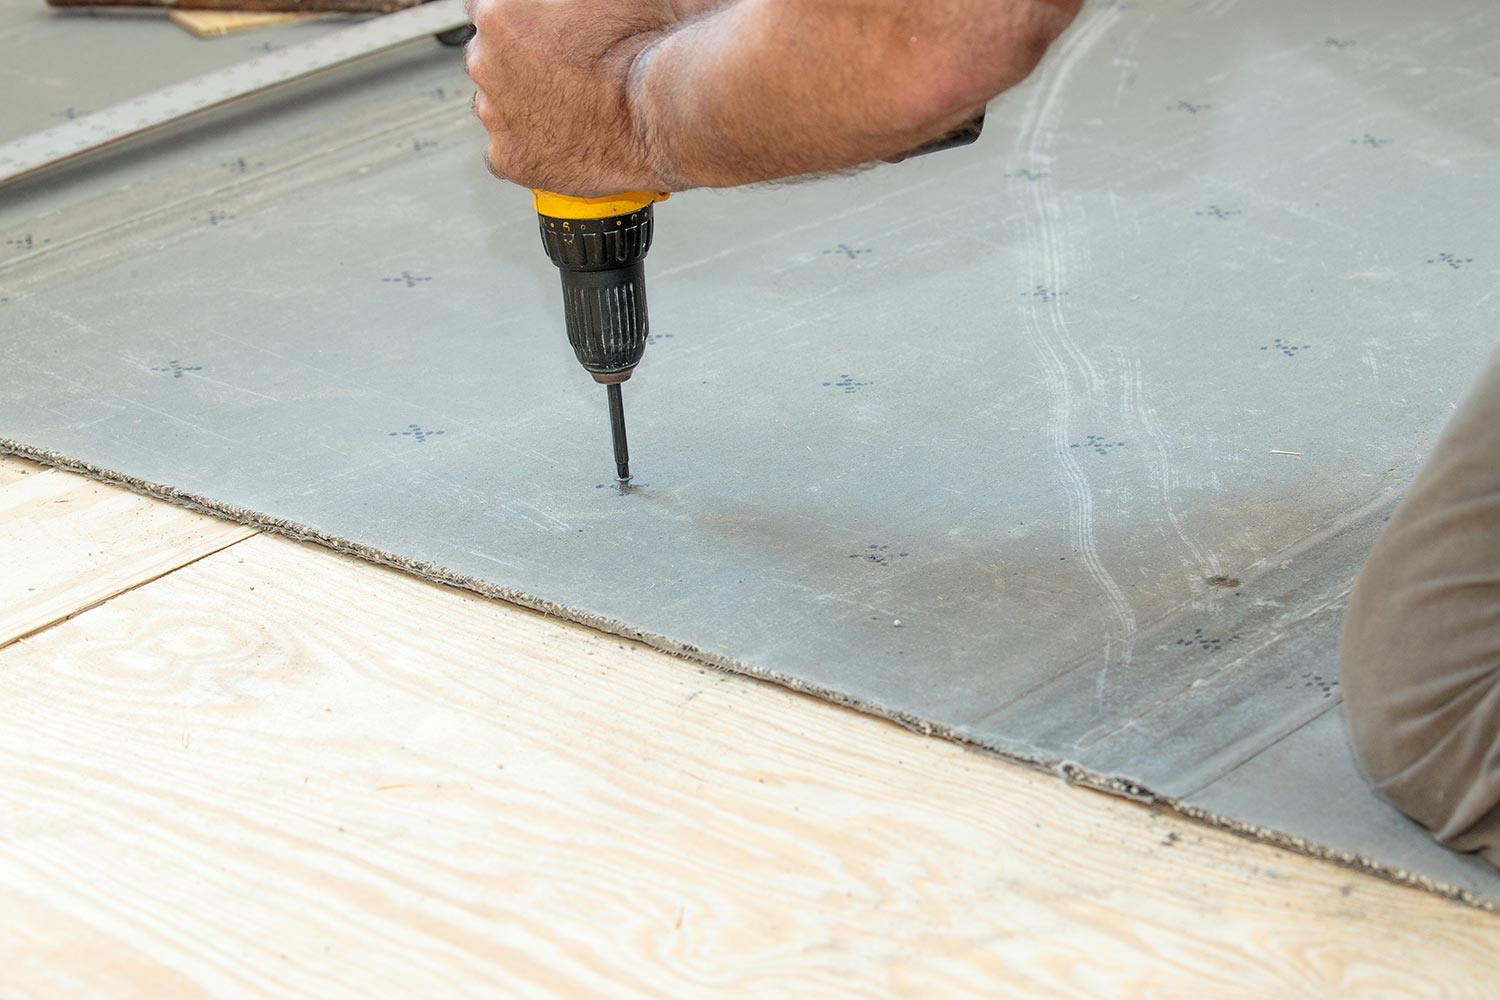 Screwing cement board to the subfloor